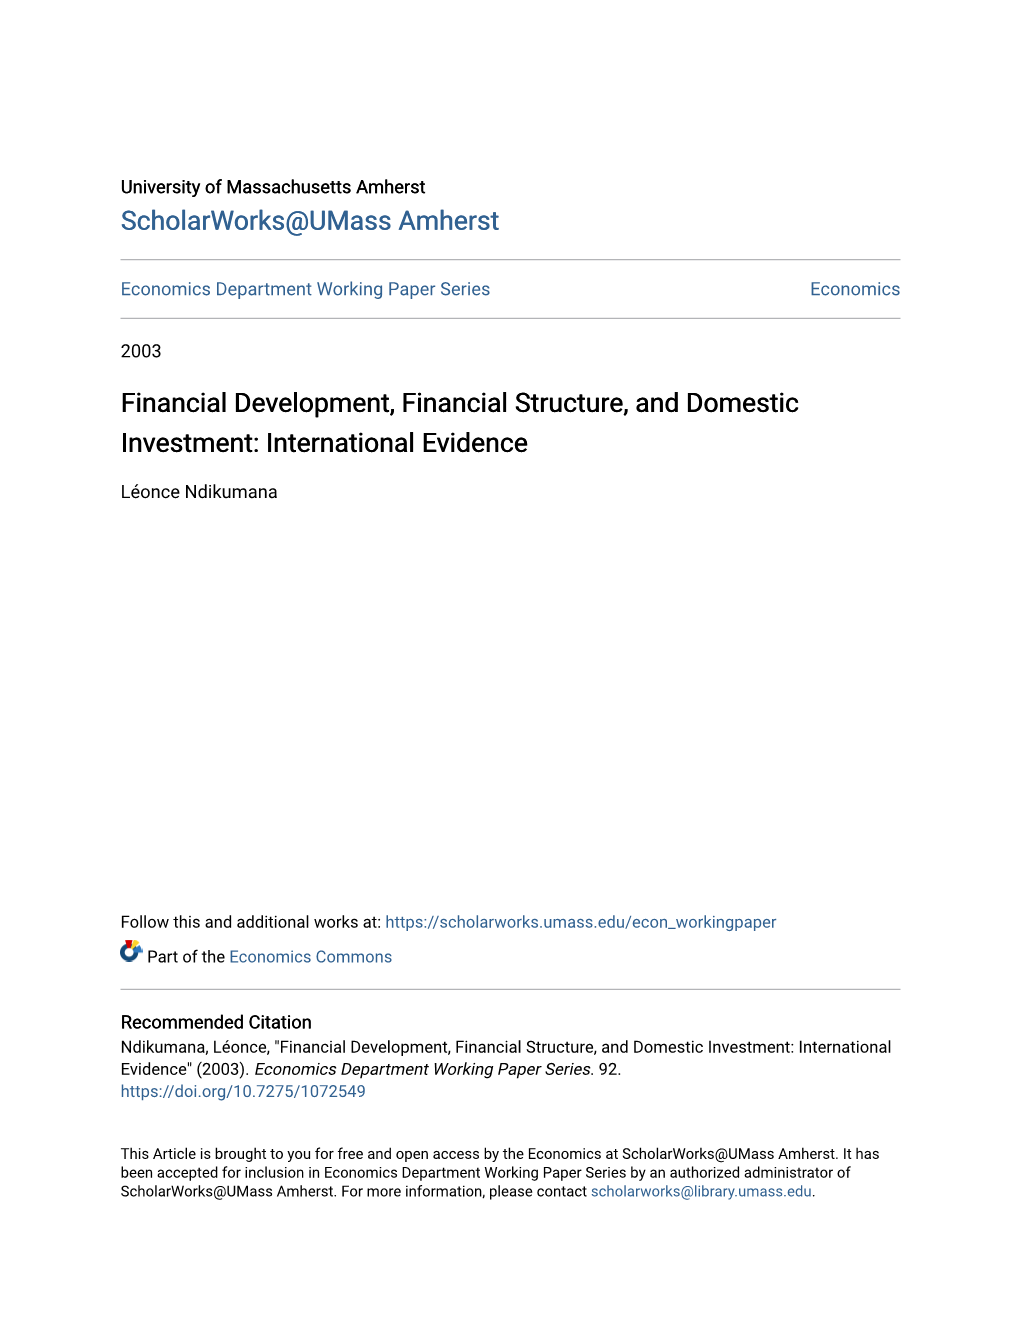 Financial Development, Financial Structure, and Domestic Investment: International Evidence